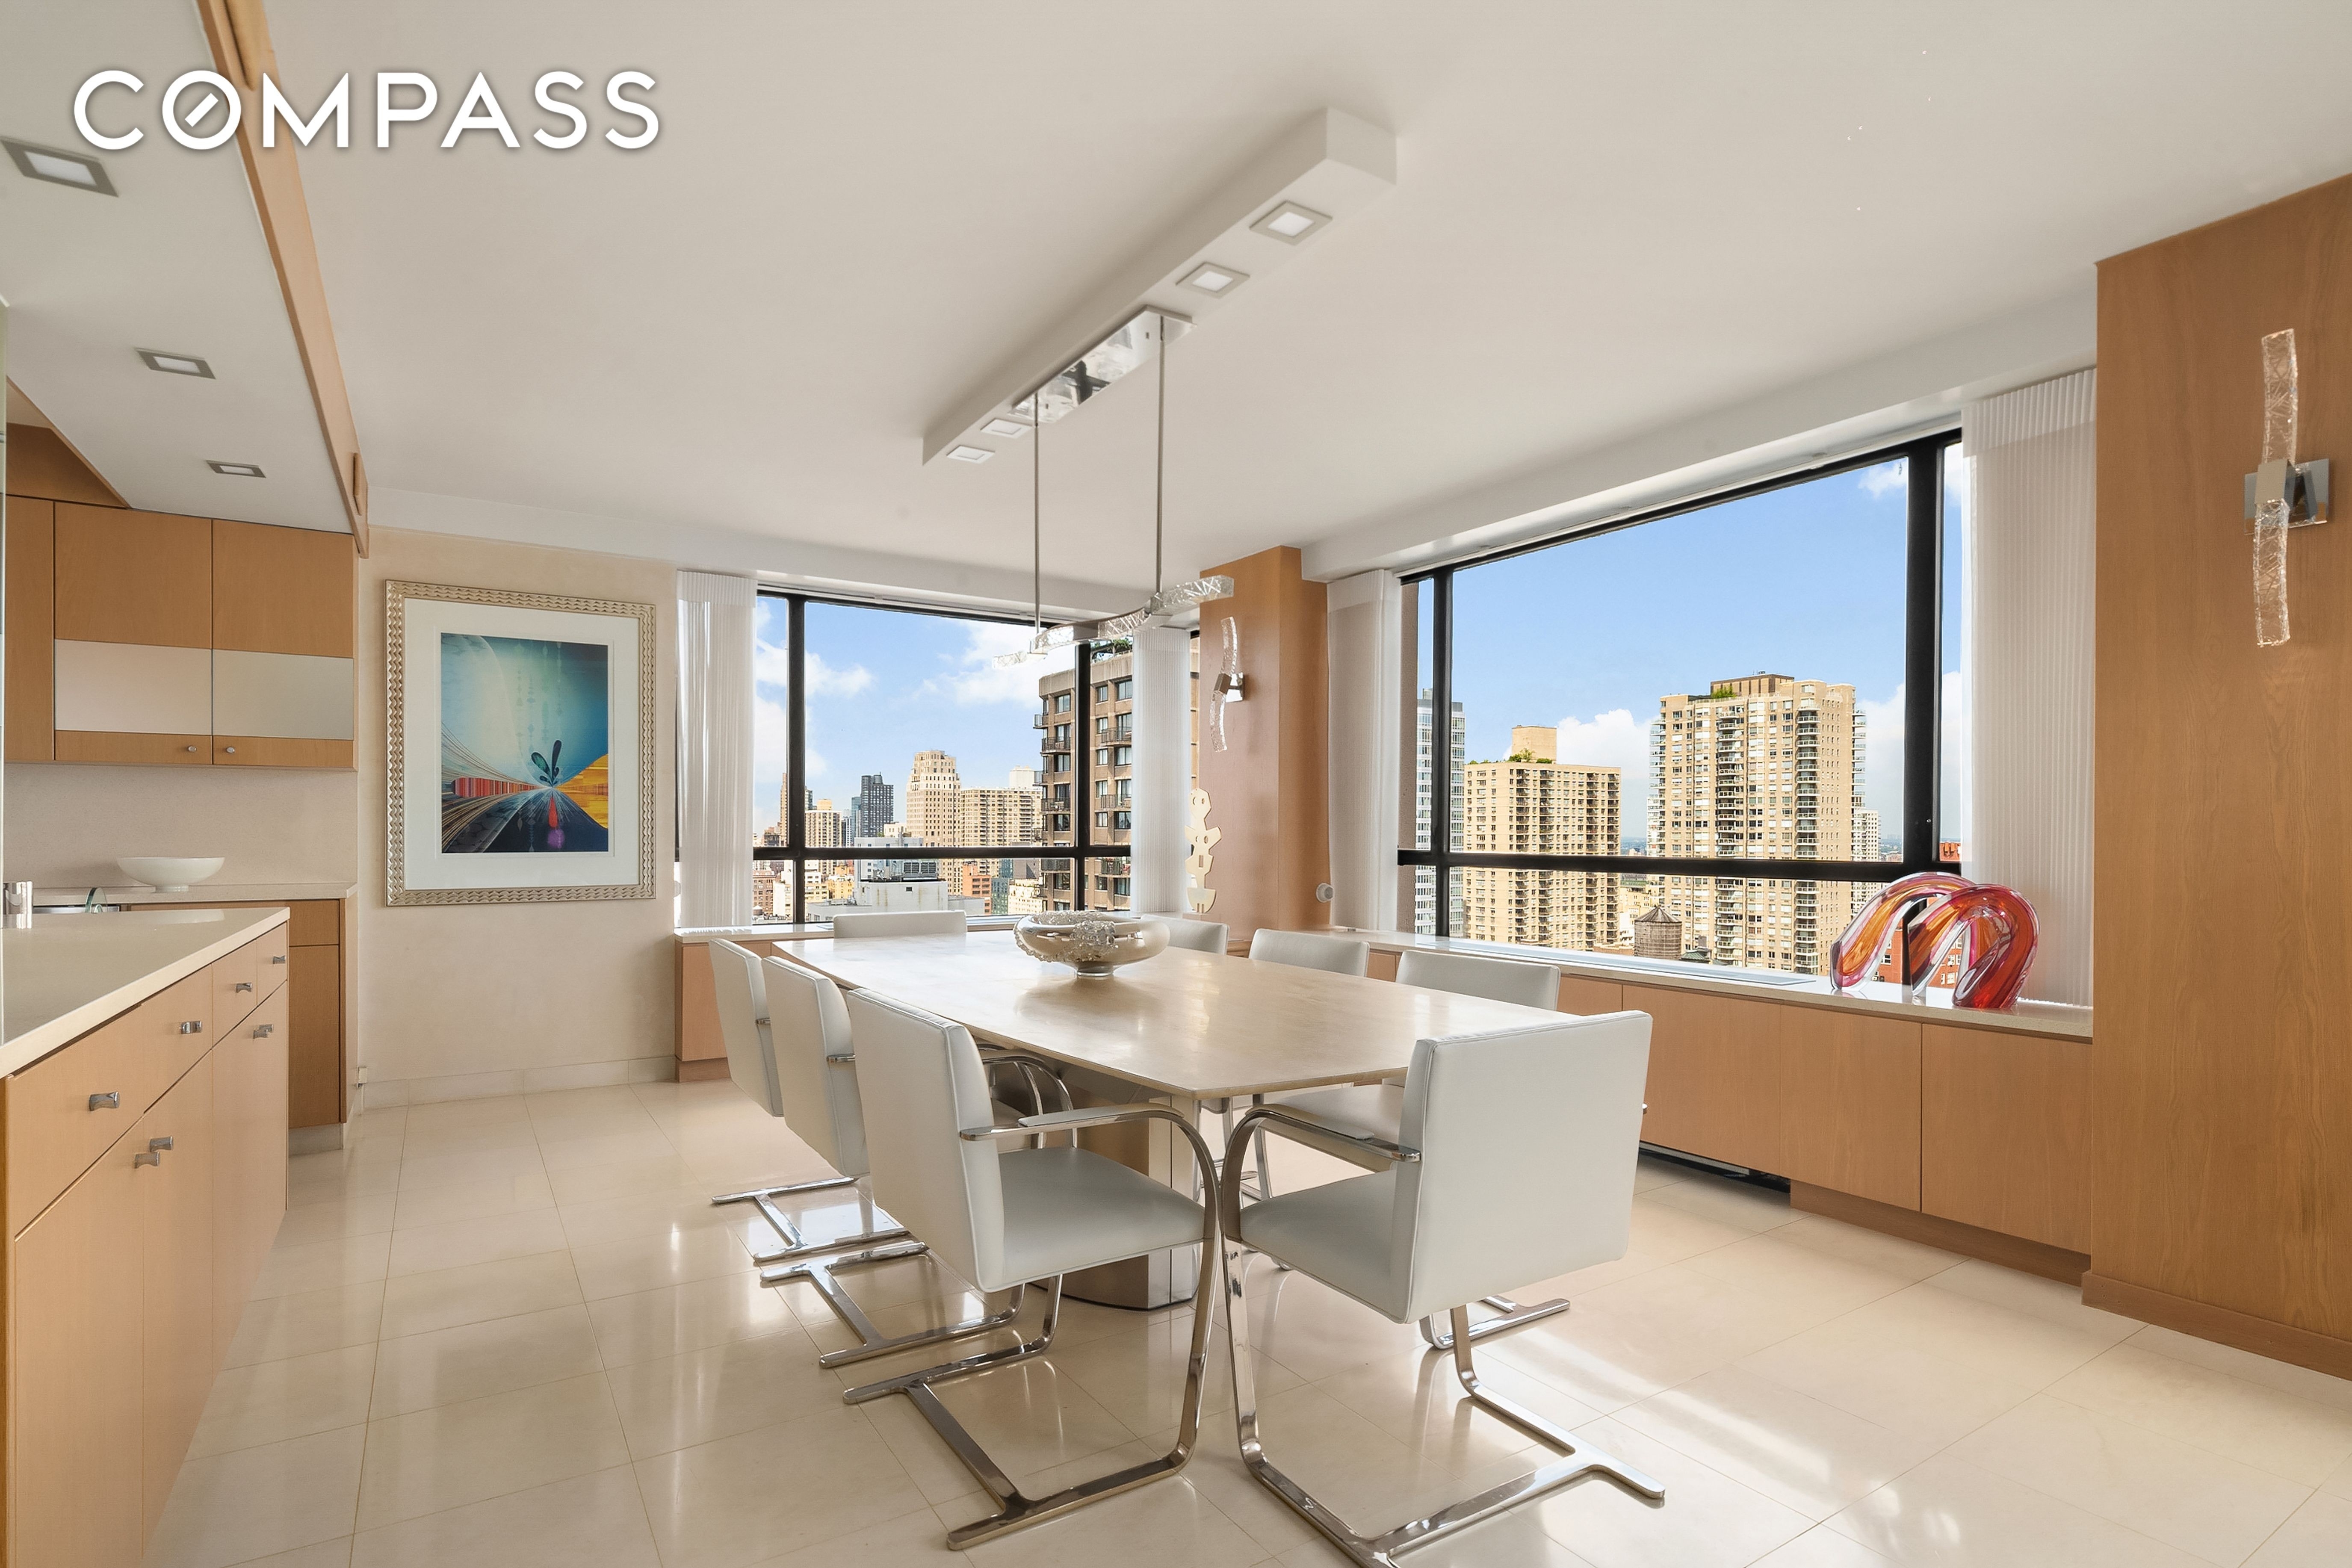 12. Co-op Properties for Sale at Tower East, 190 E 72ND ST, 24AB Lenox Hill, New York, New York 10021